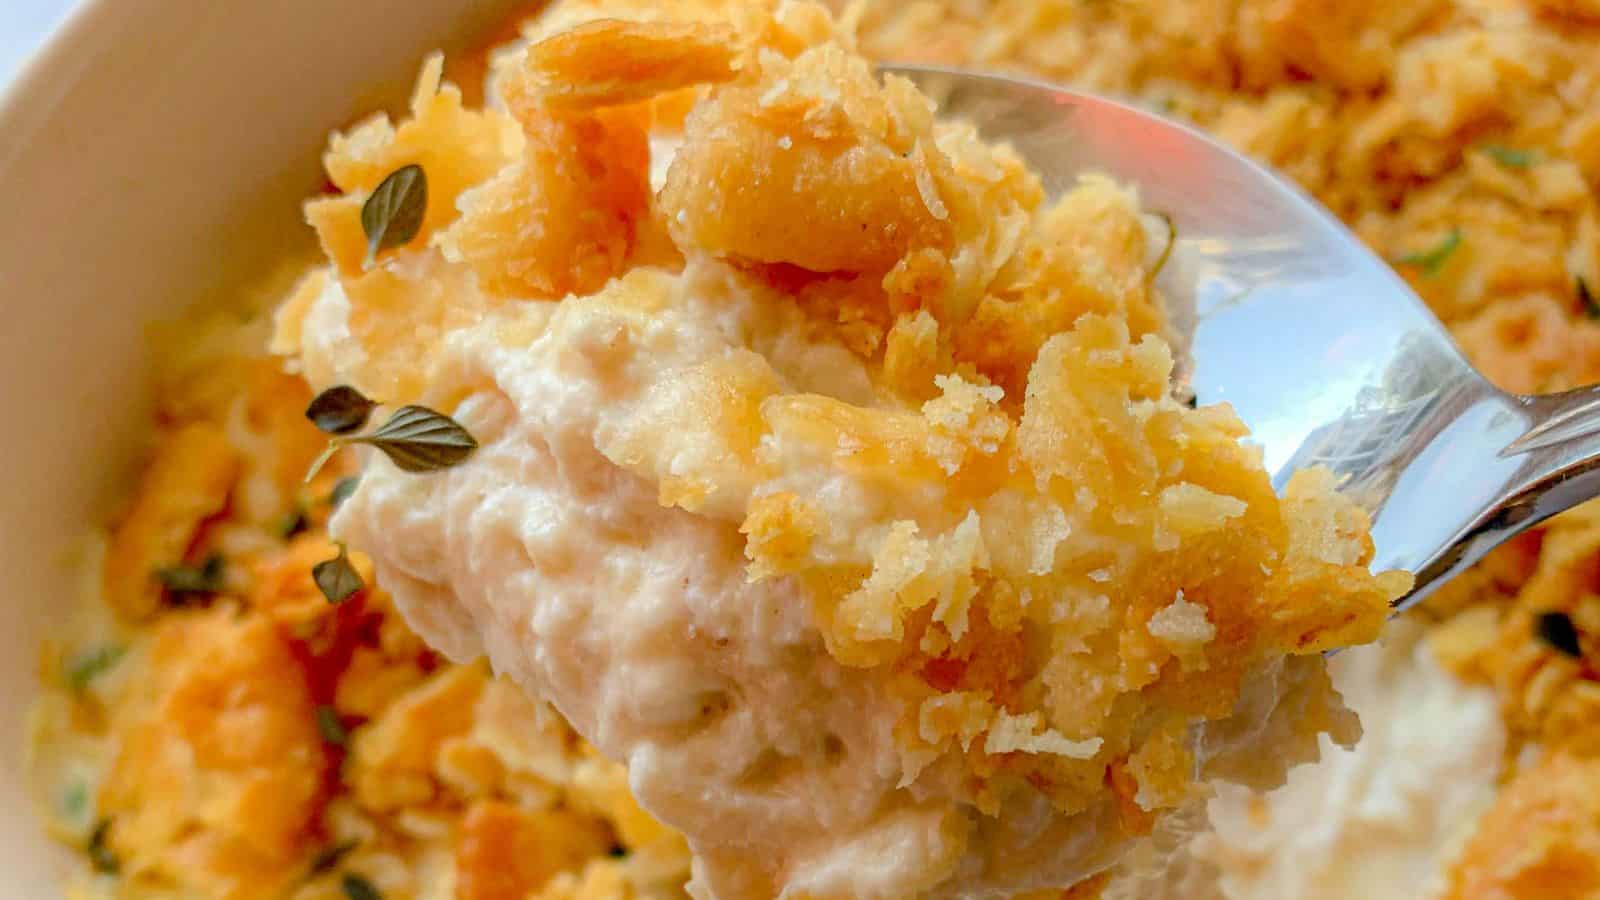 A spoonful of chicken casserole with a Ritz cracker topping.